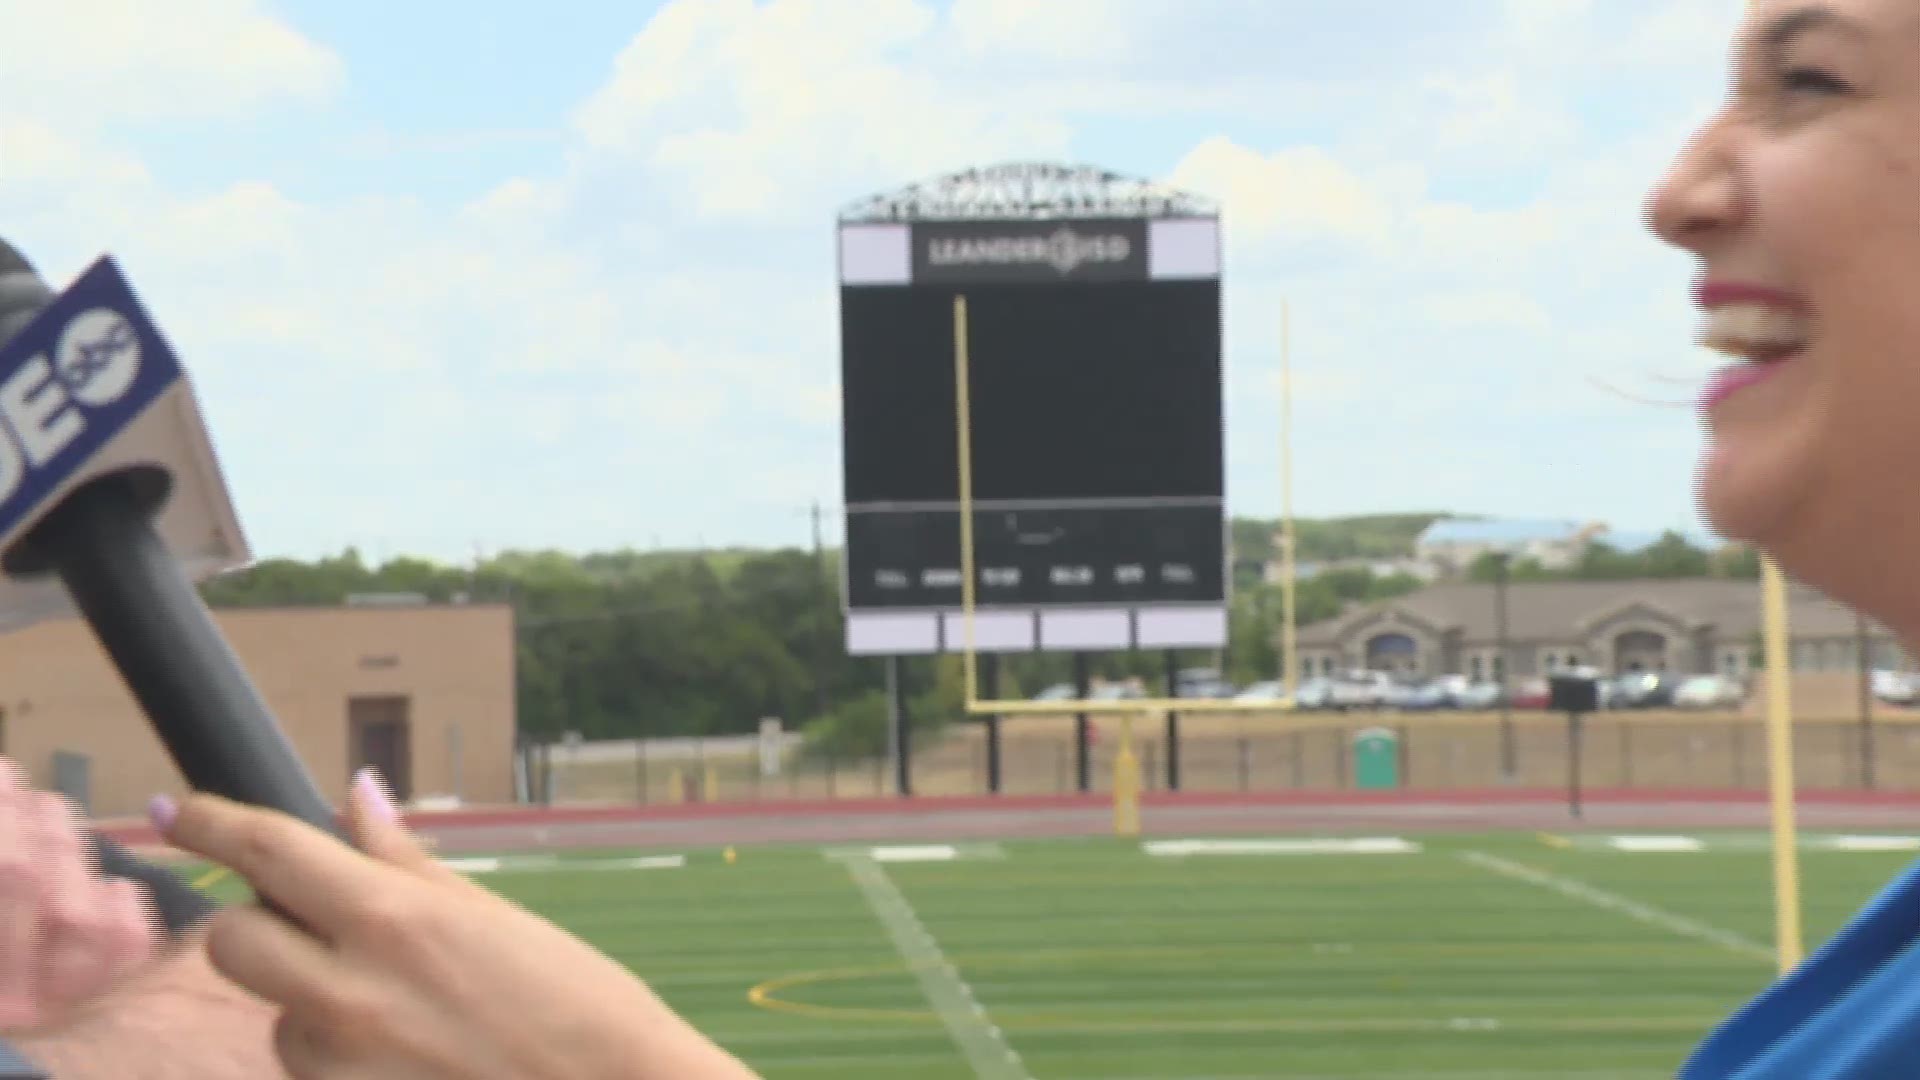 KVUE's Stacy Slayden talks with Leander coach Tim Smith about the upcoming season